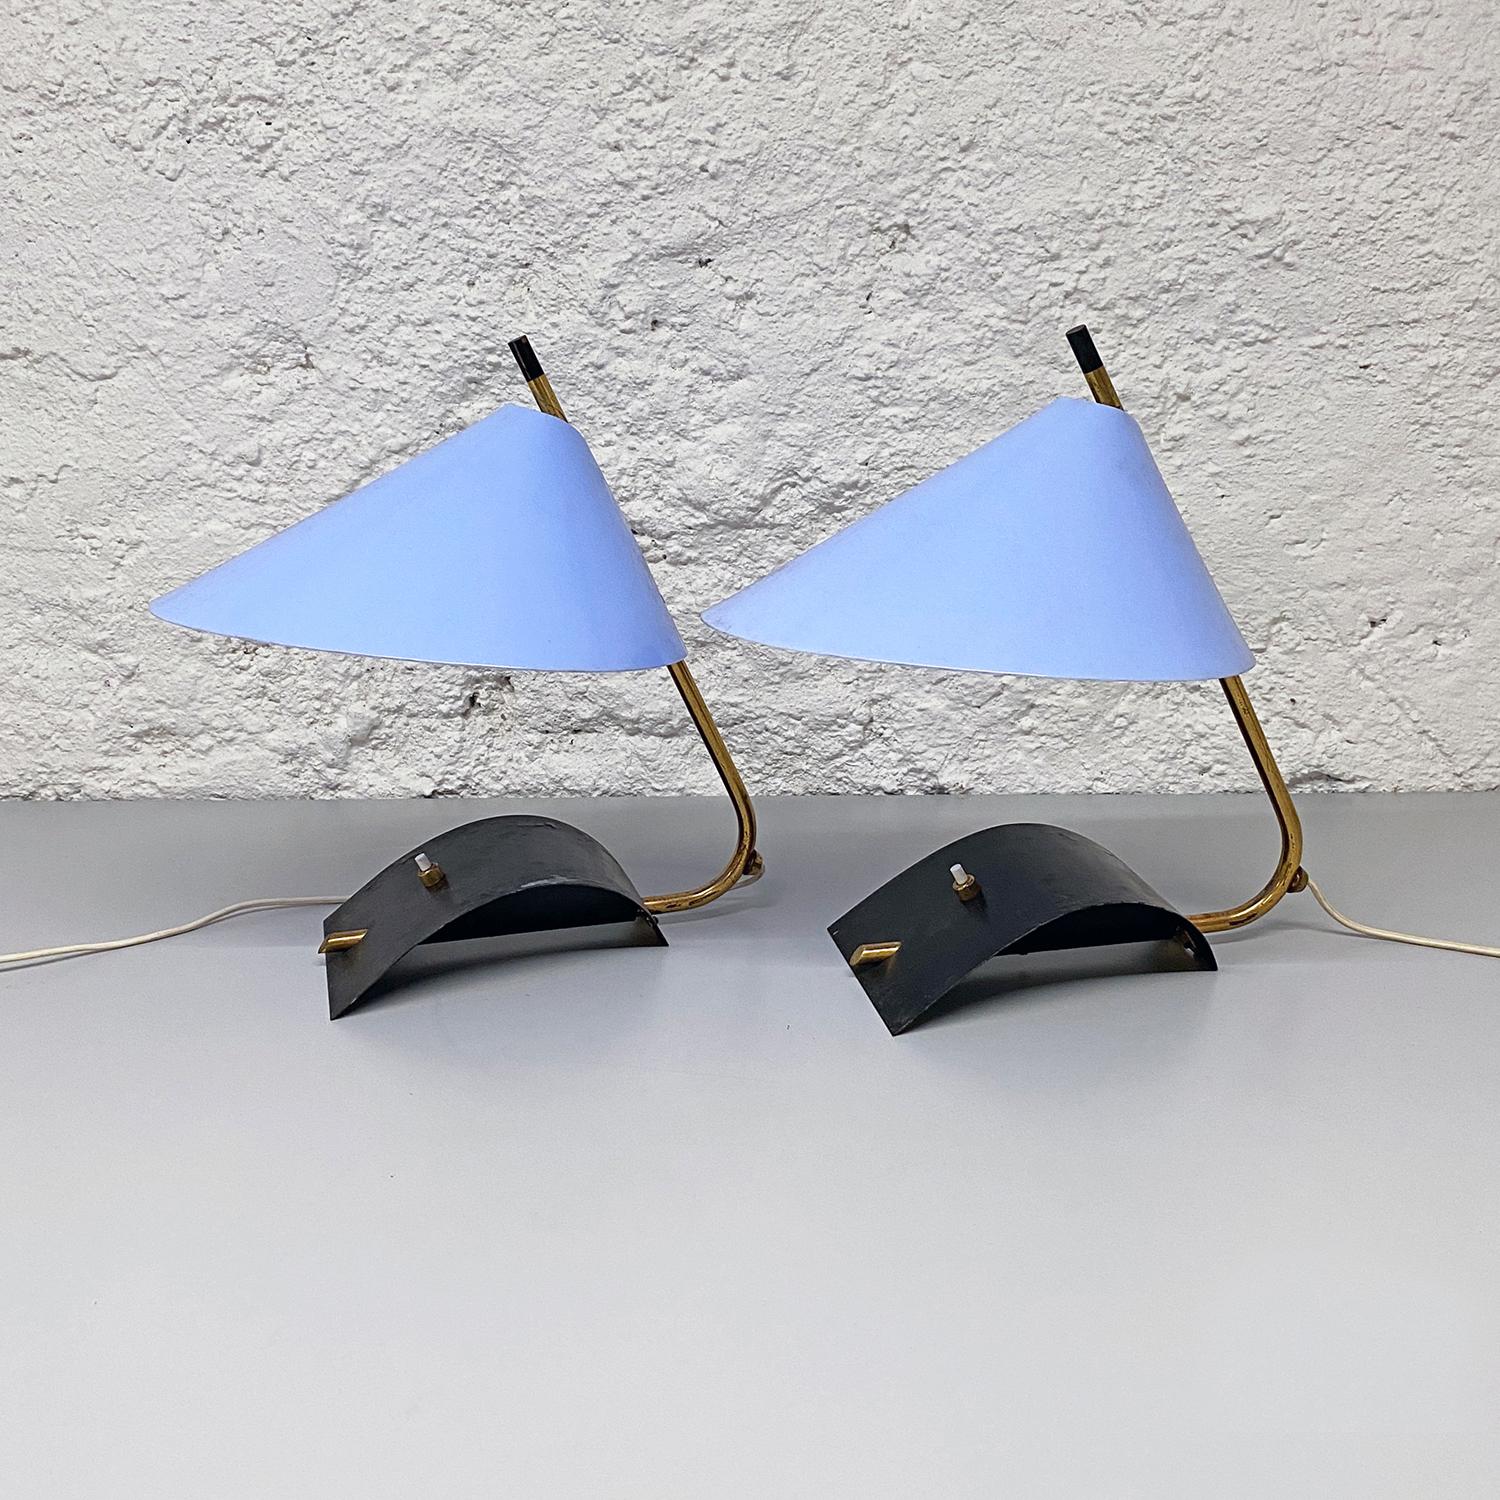 Metal Italian Mid-Century Brass Table Lamps with Blue Lampshade by Stilnovo, 1950s